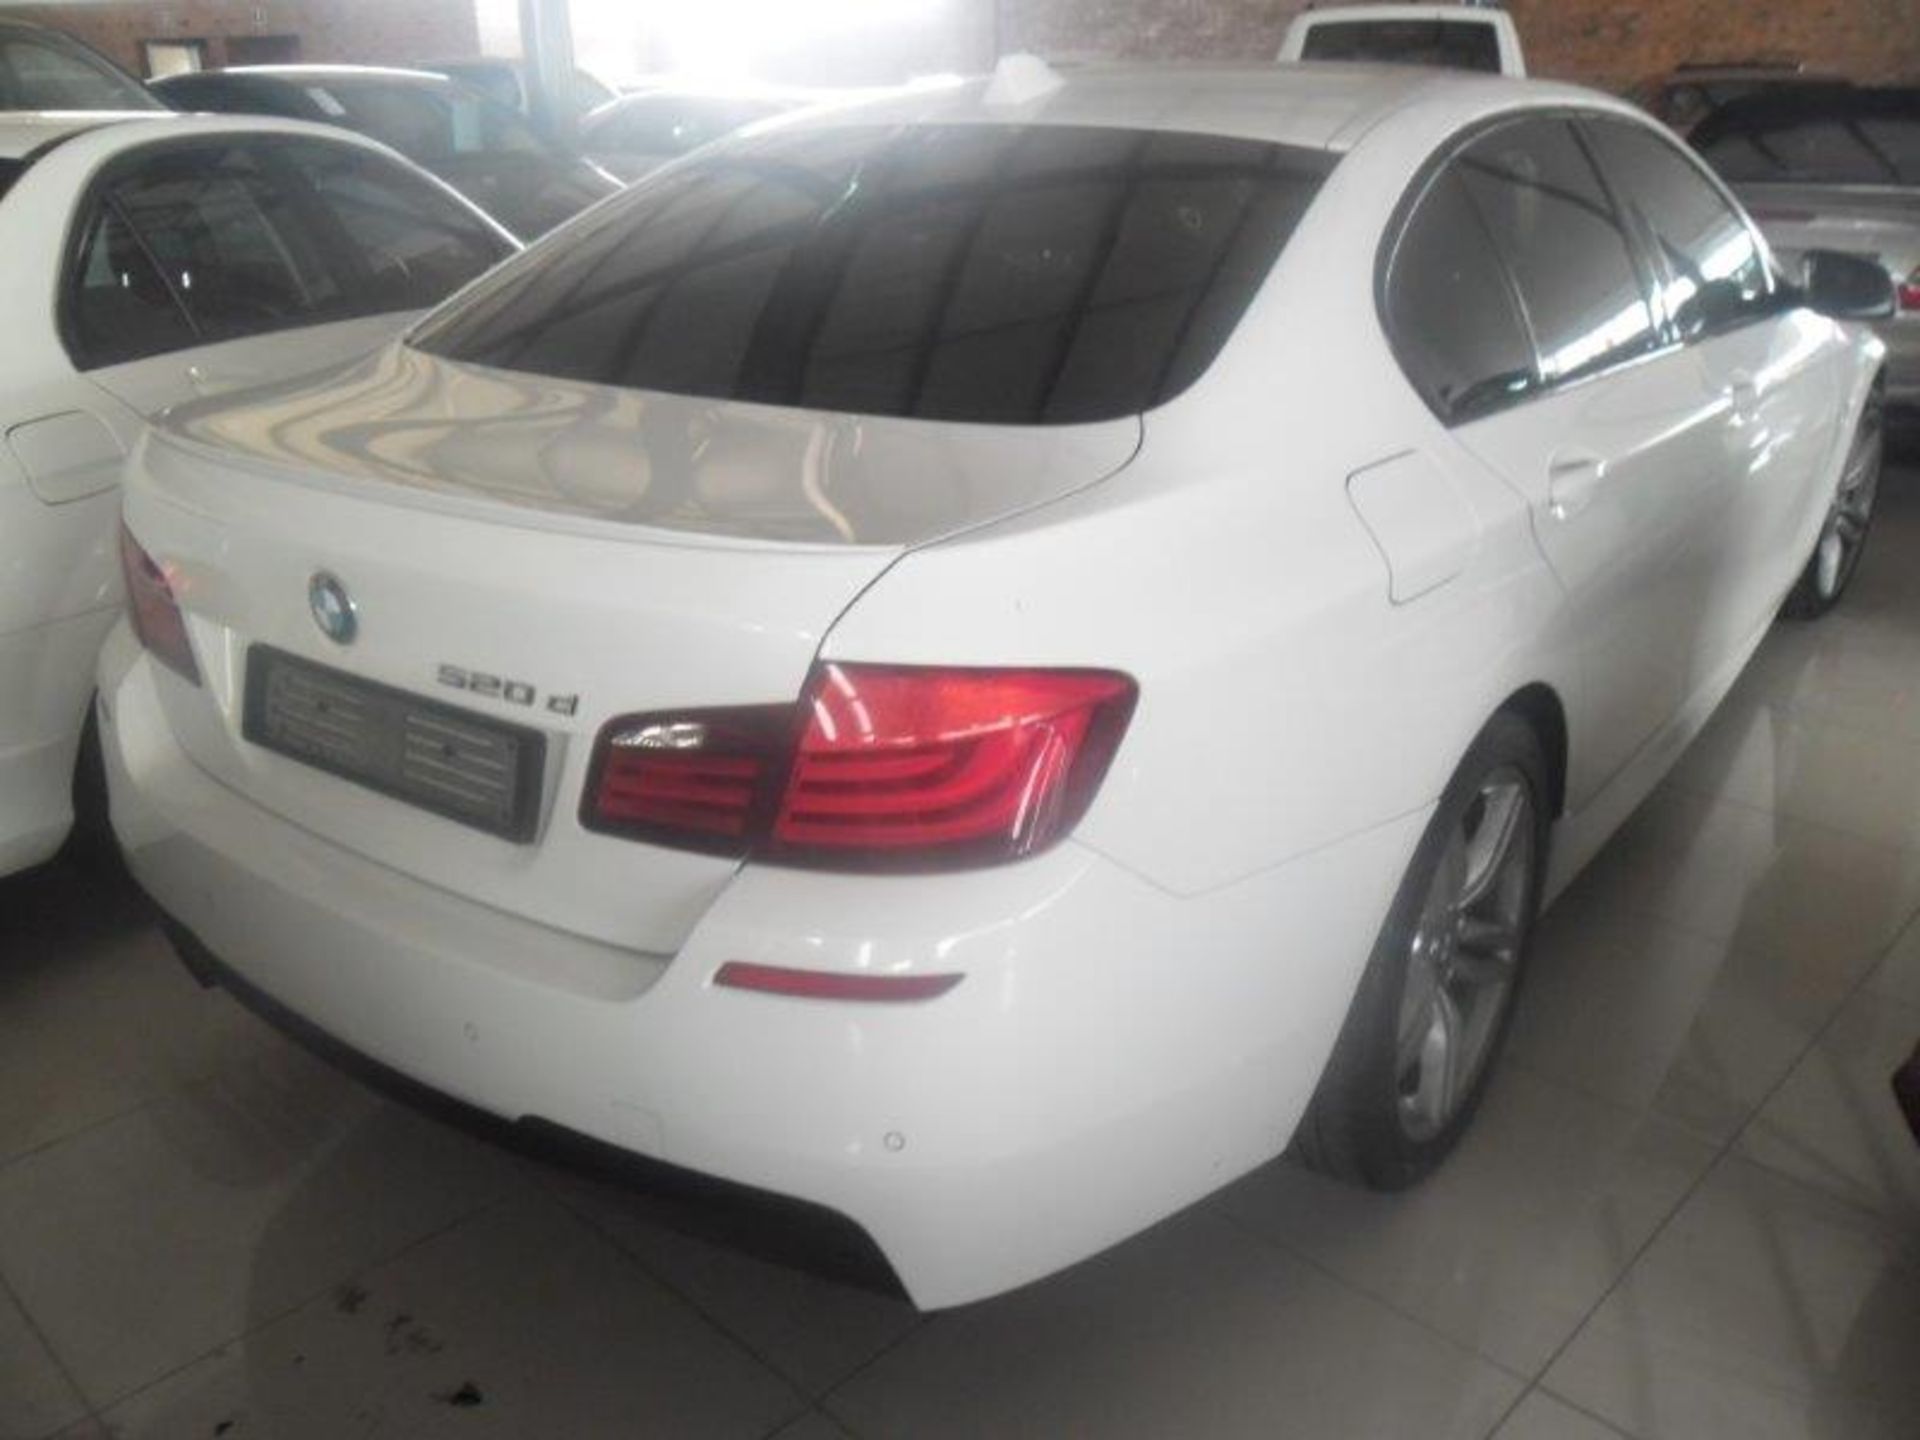 2011-07-28 BMW 520d Auto (Black Leather, Sunroof, PDC) (White)(88 653 kms) Vin (WBAFW1205BC837160) - Image 2 of 2